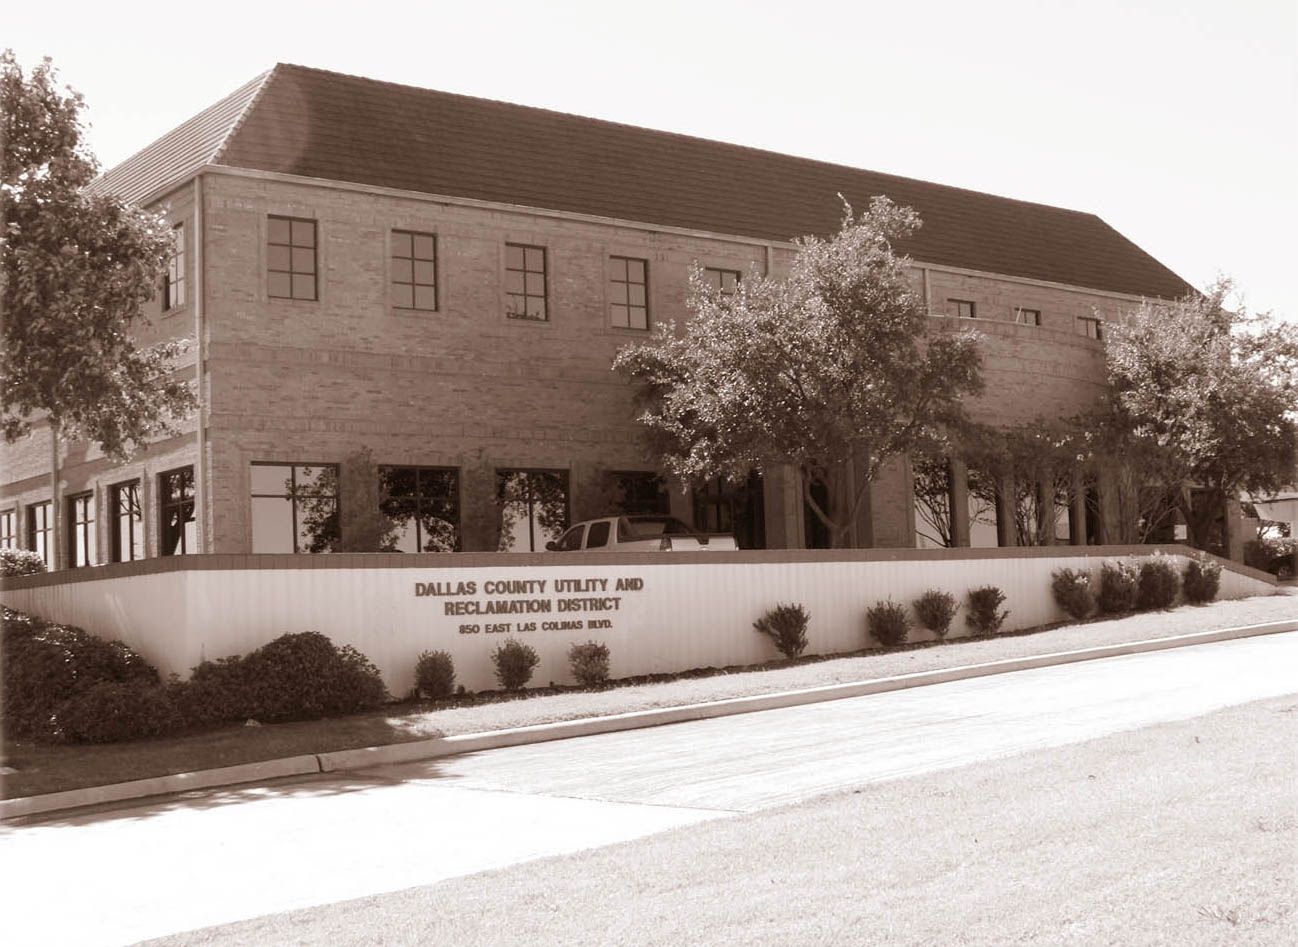 Headquarters for Dallas County Utility and Reclamation District.